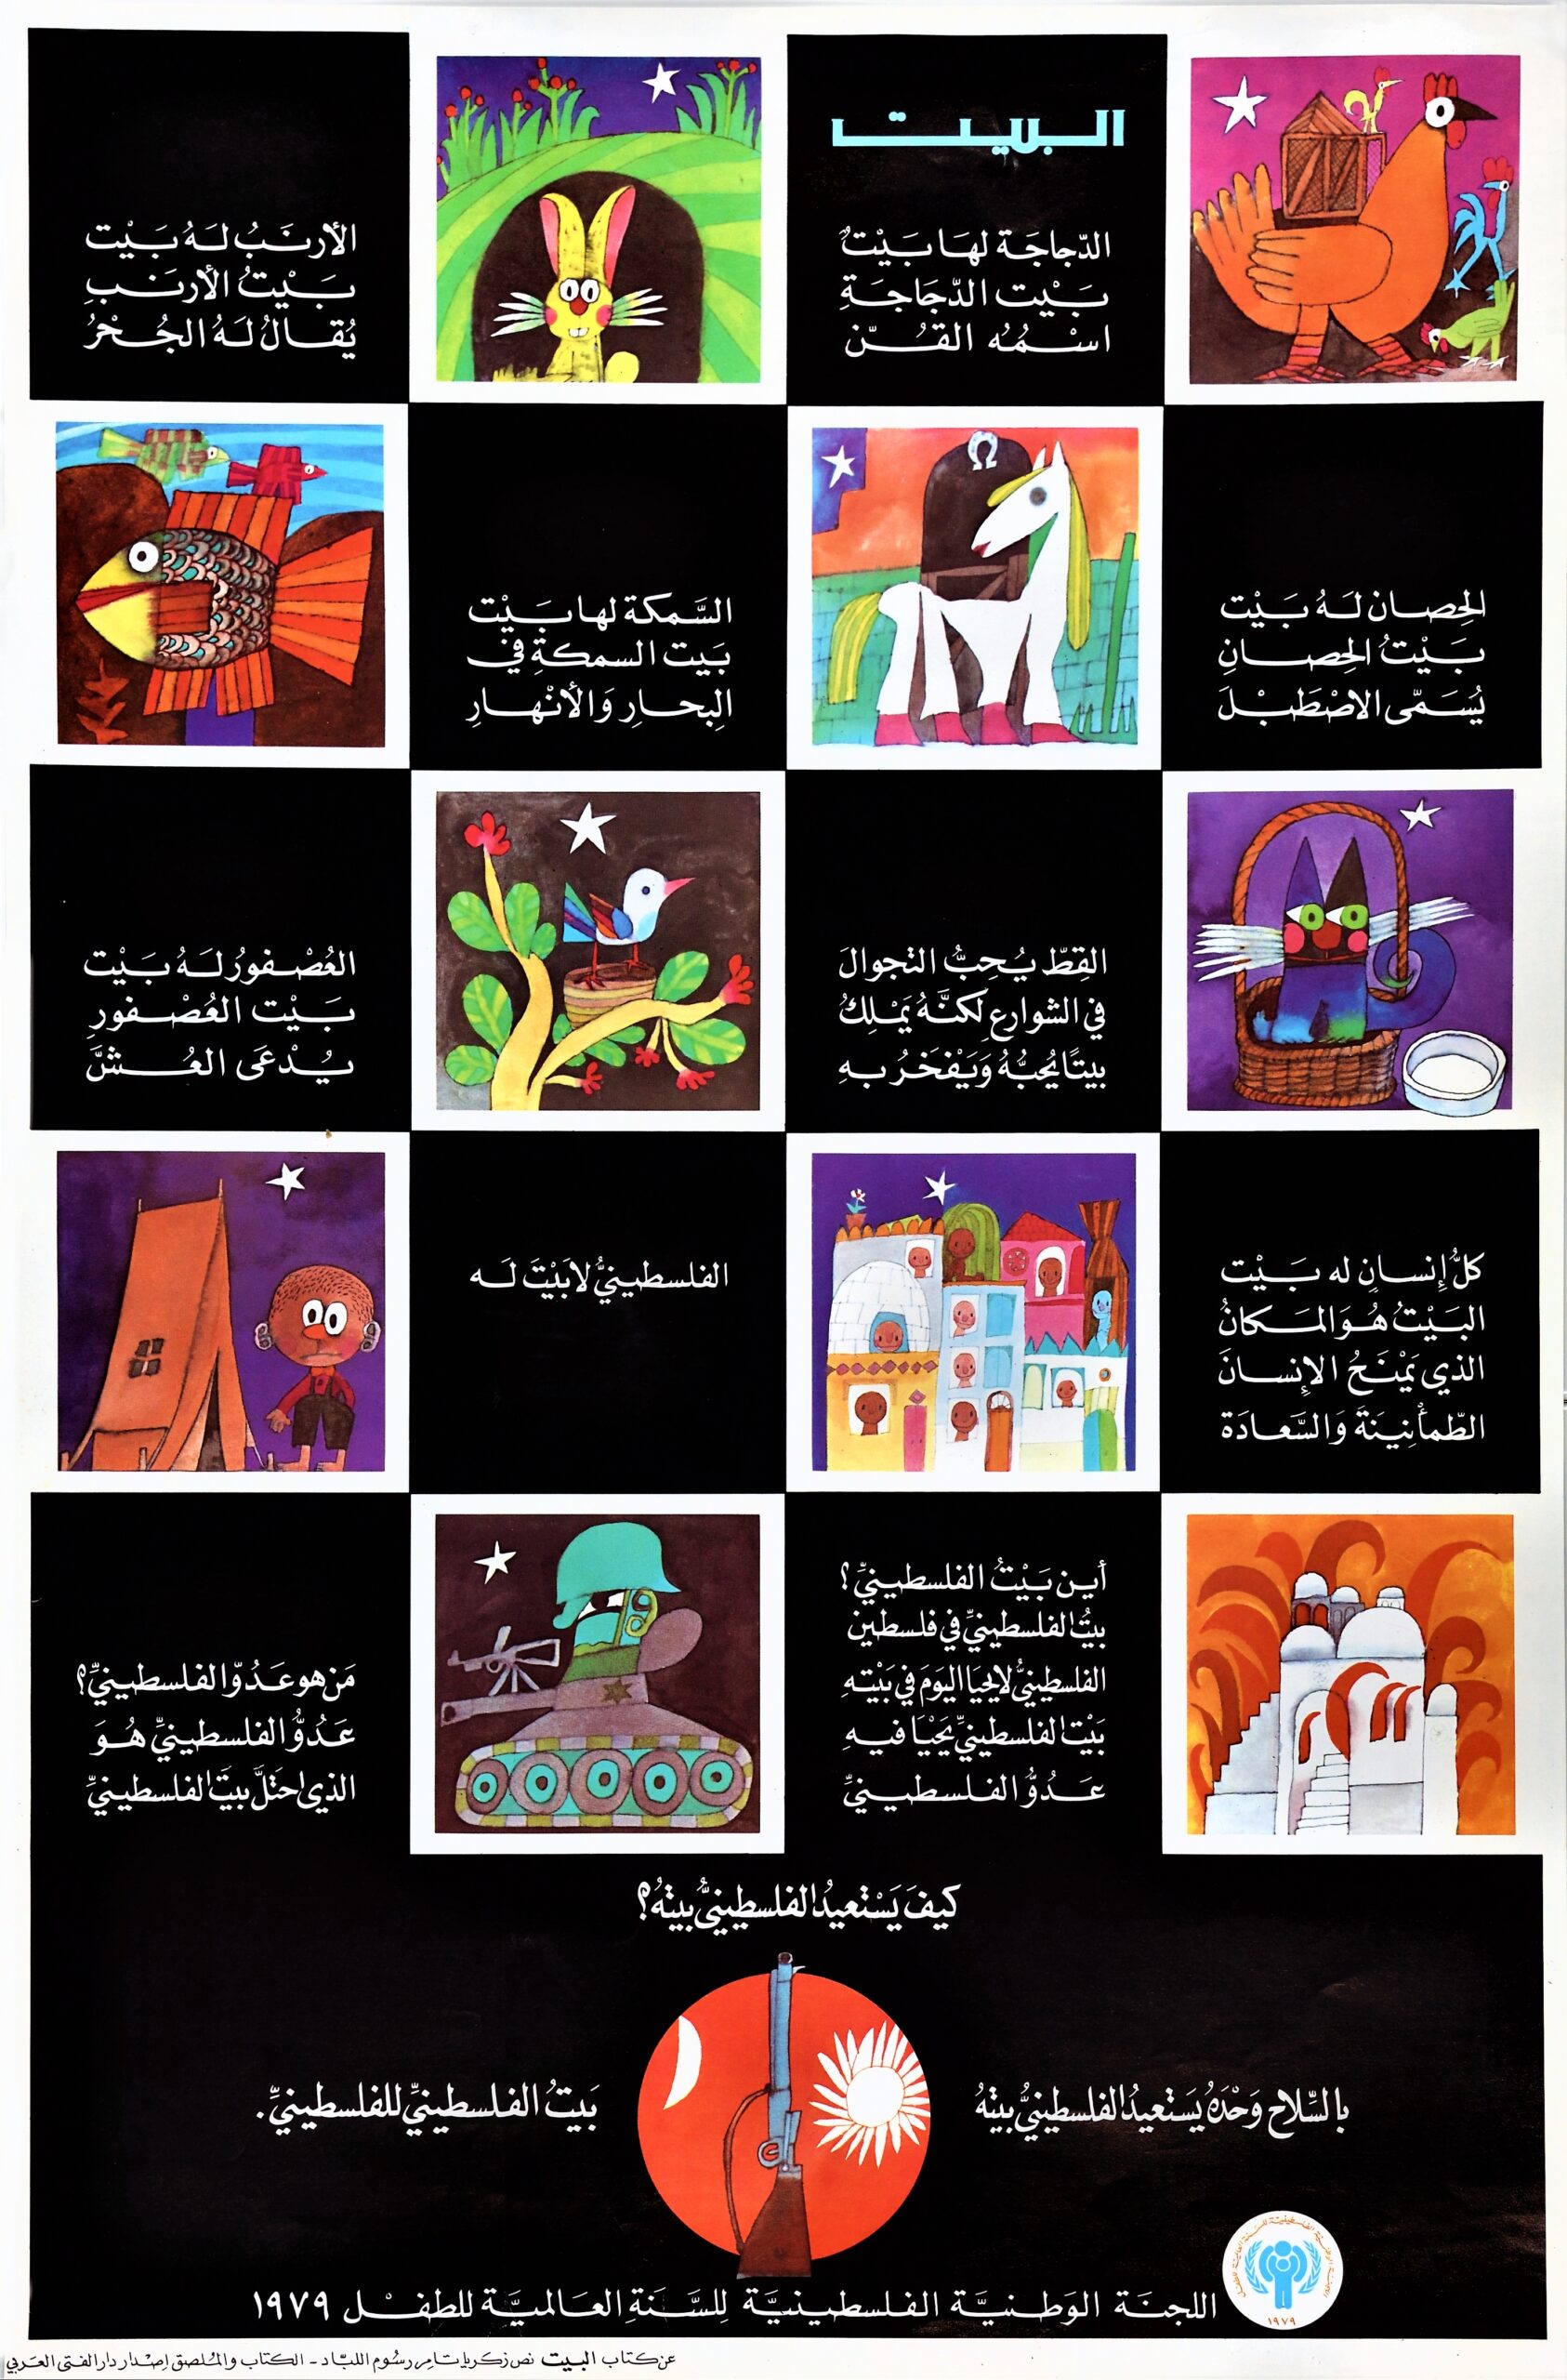 a poster showing all pages of the book home designed by Mohieddine Ellabbad